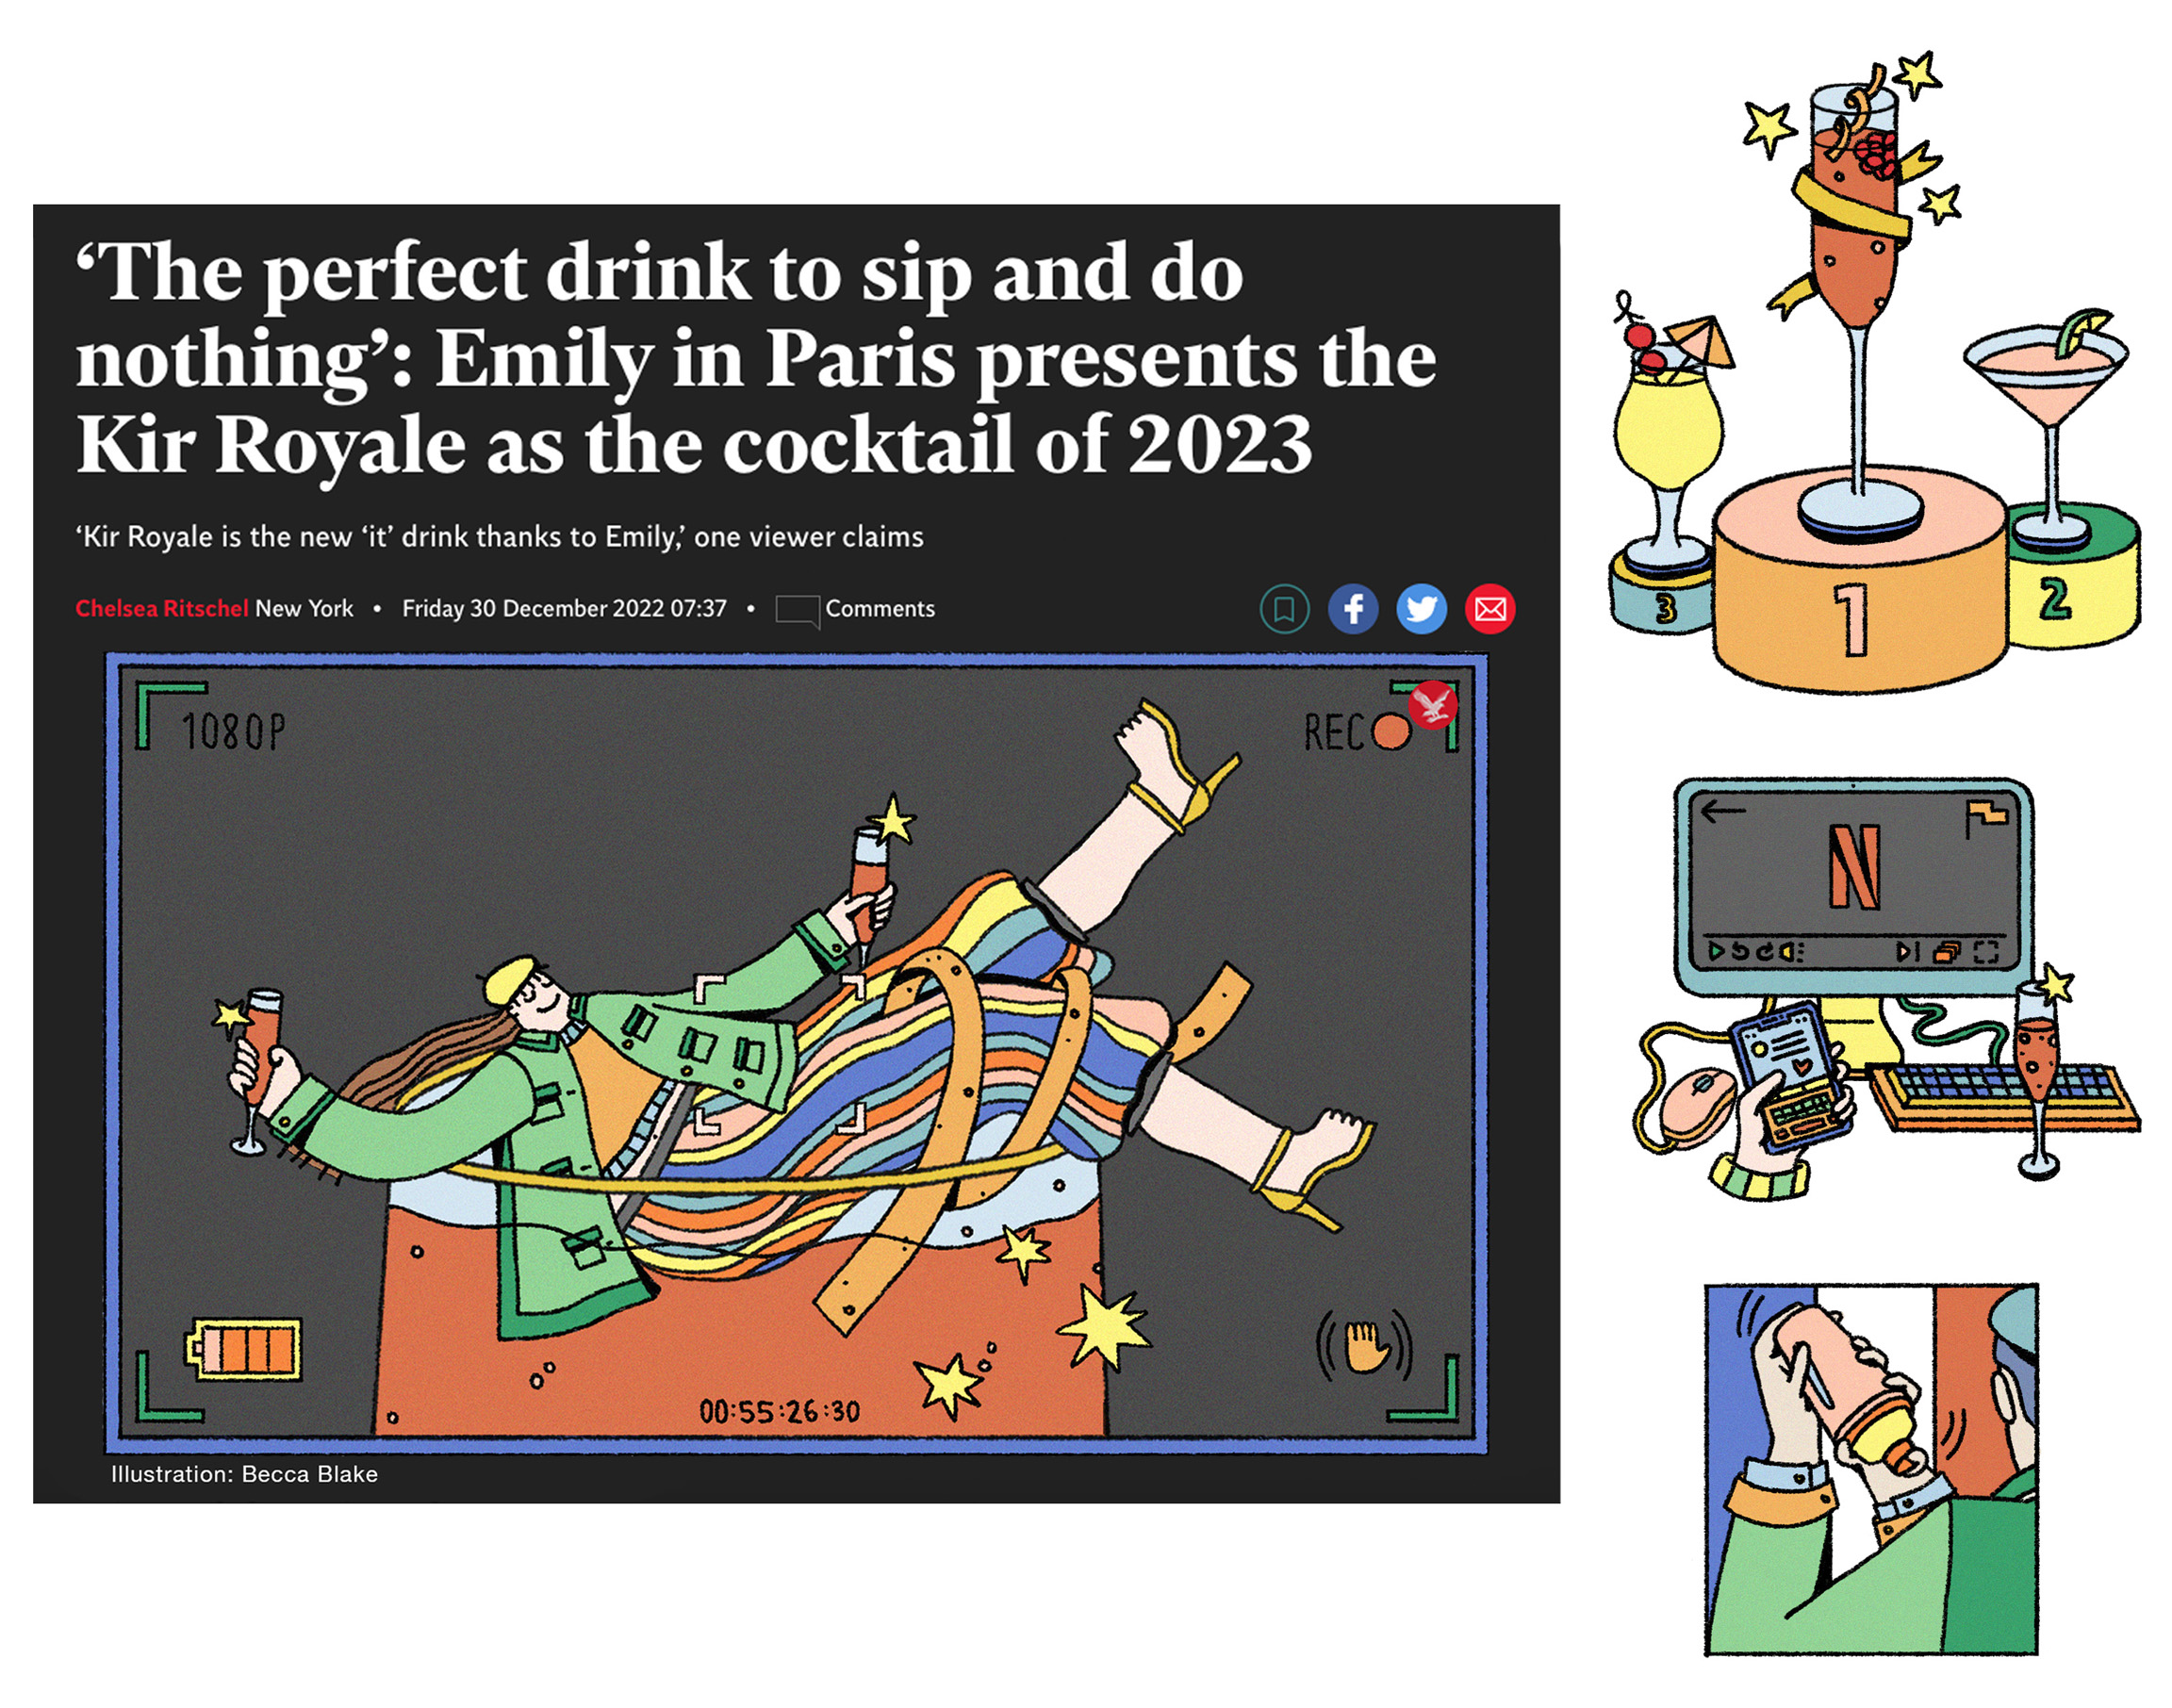 Illustration work by Becca Blake showing a character sat in a large cocktail and spot illustrations on the right.